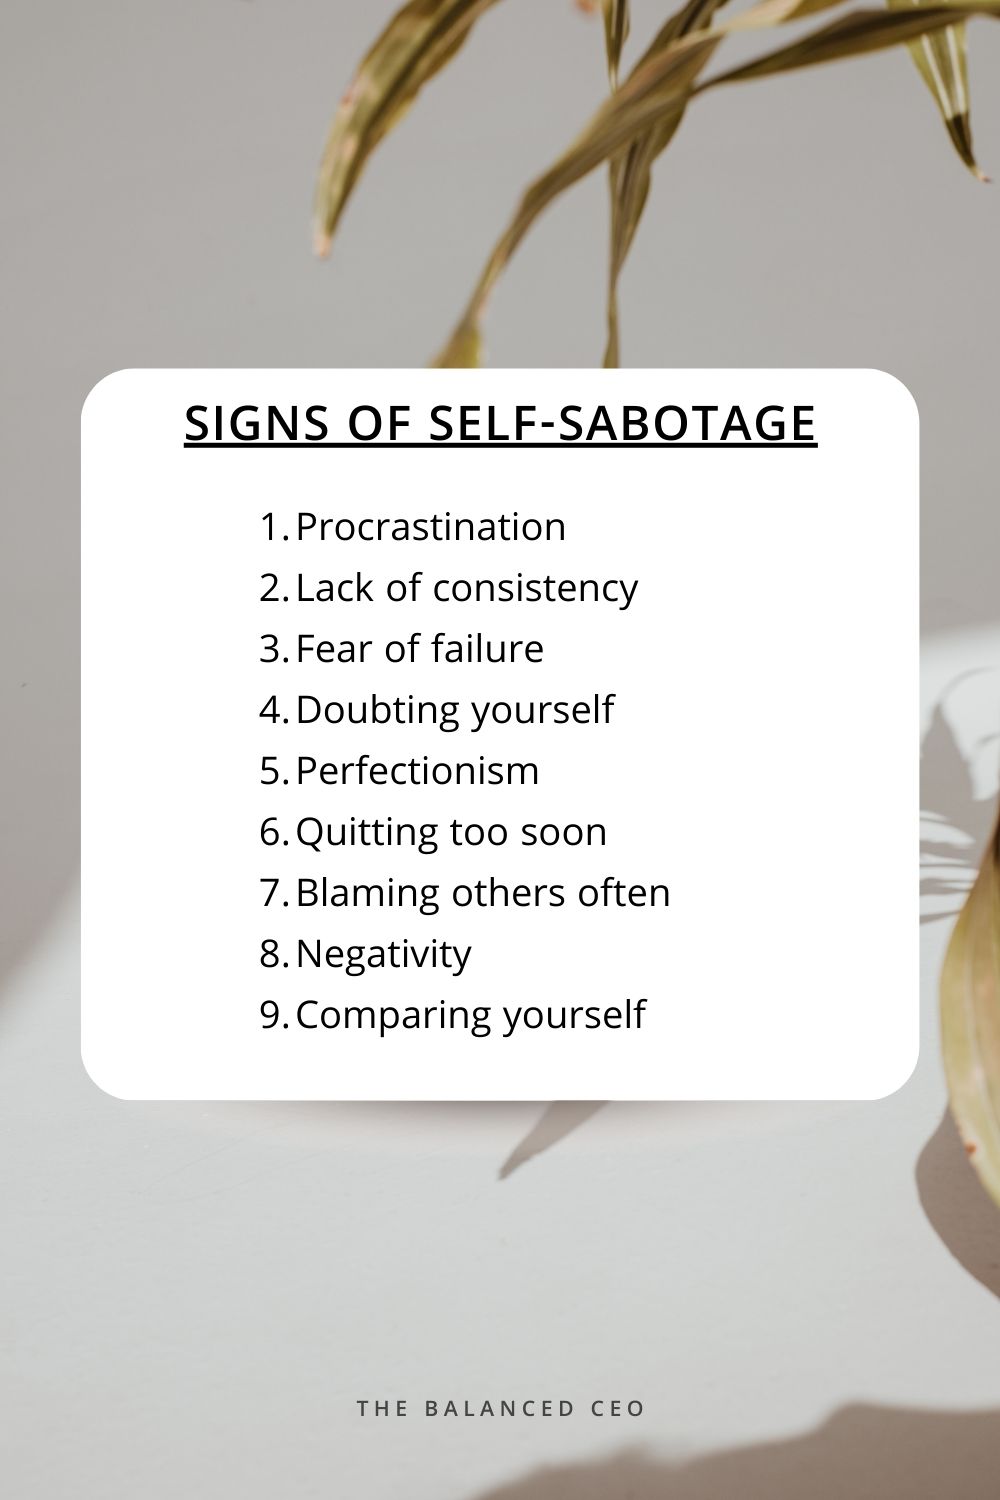 How to Recognize and Stop Self-Sabotaging Yourself